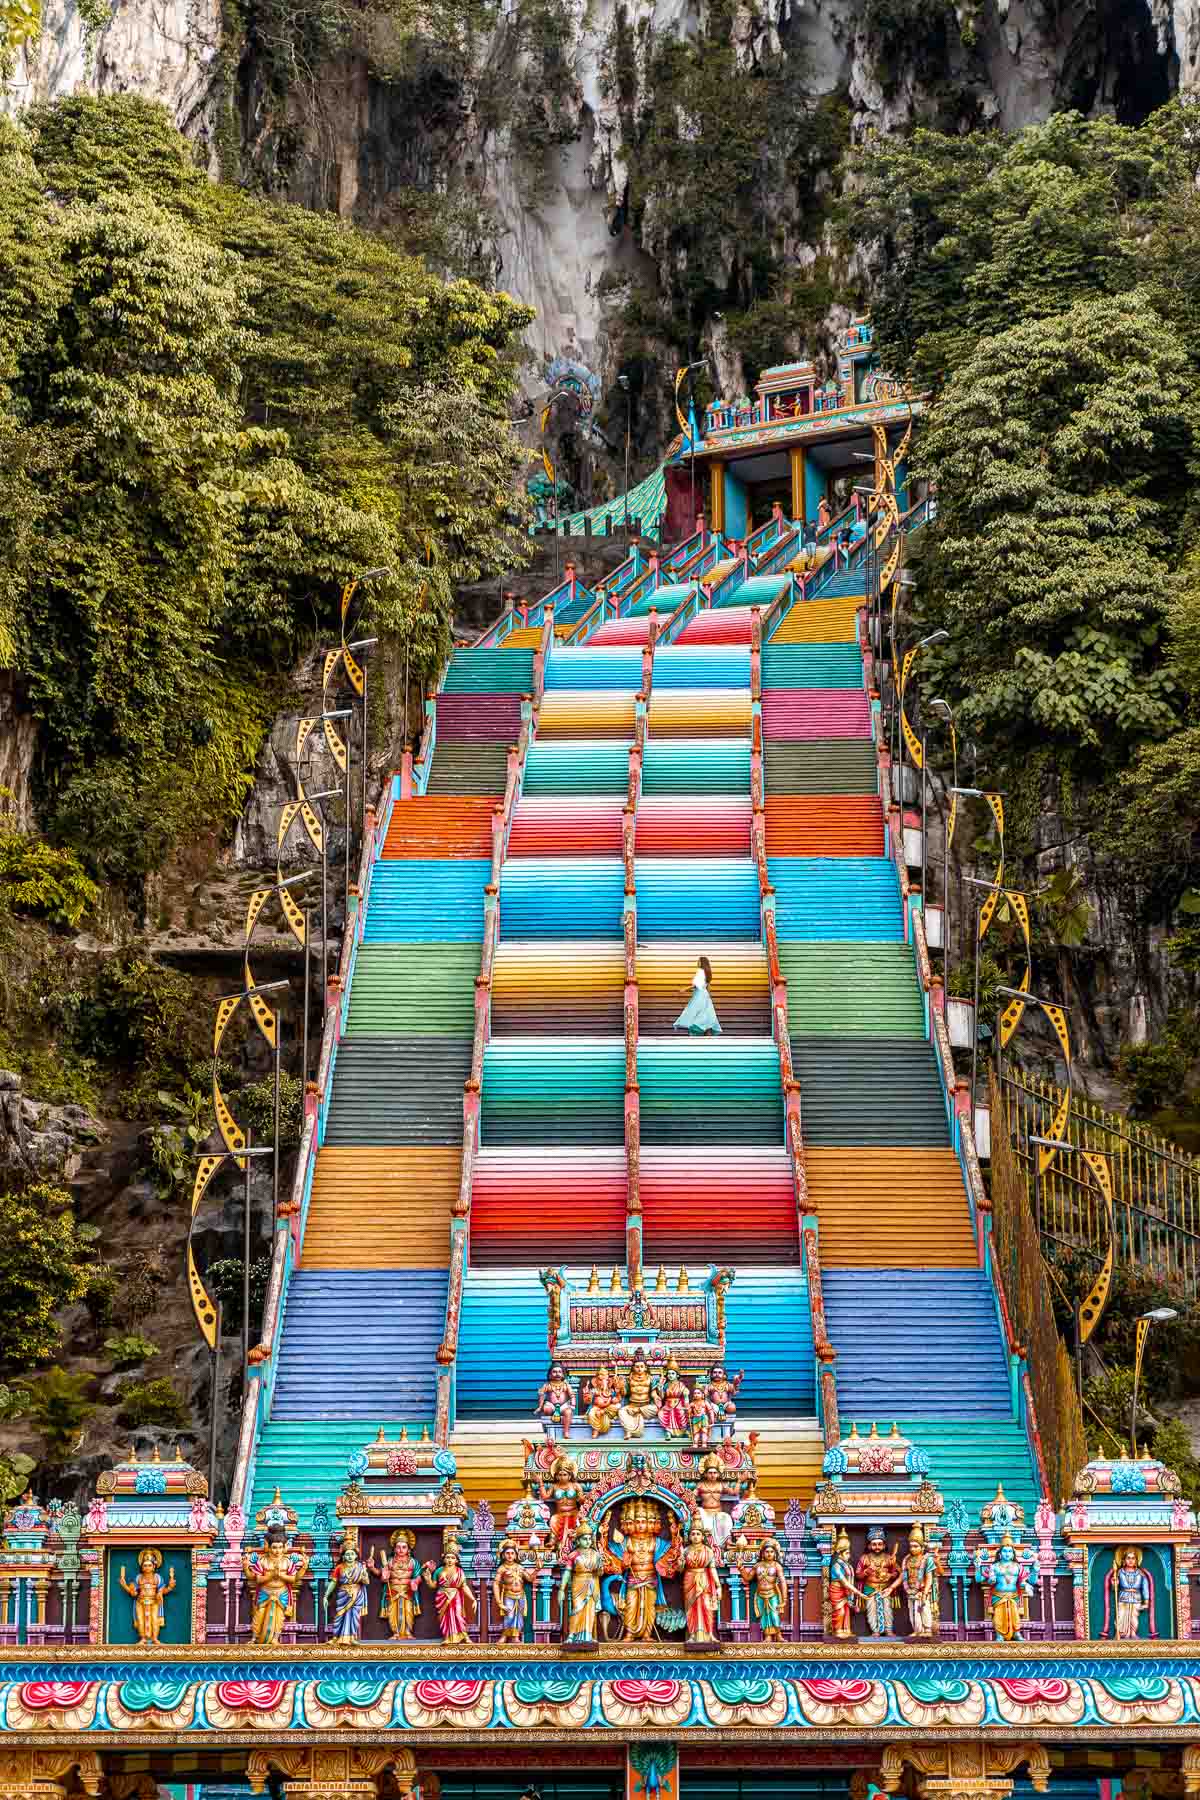 Girl in a blue dress standing on the colorful stairs at Batu Caves, Kuala Lumpur